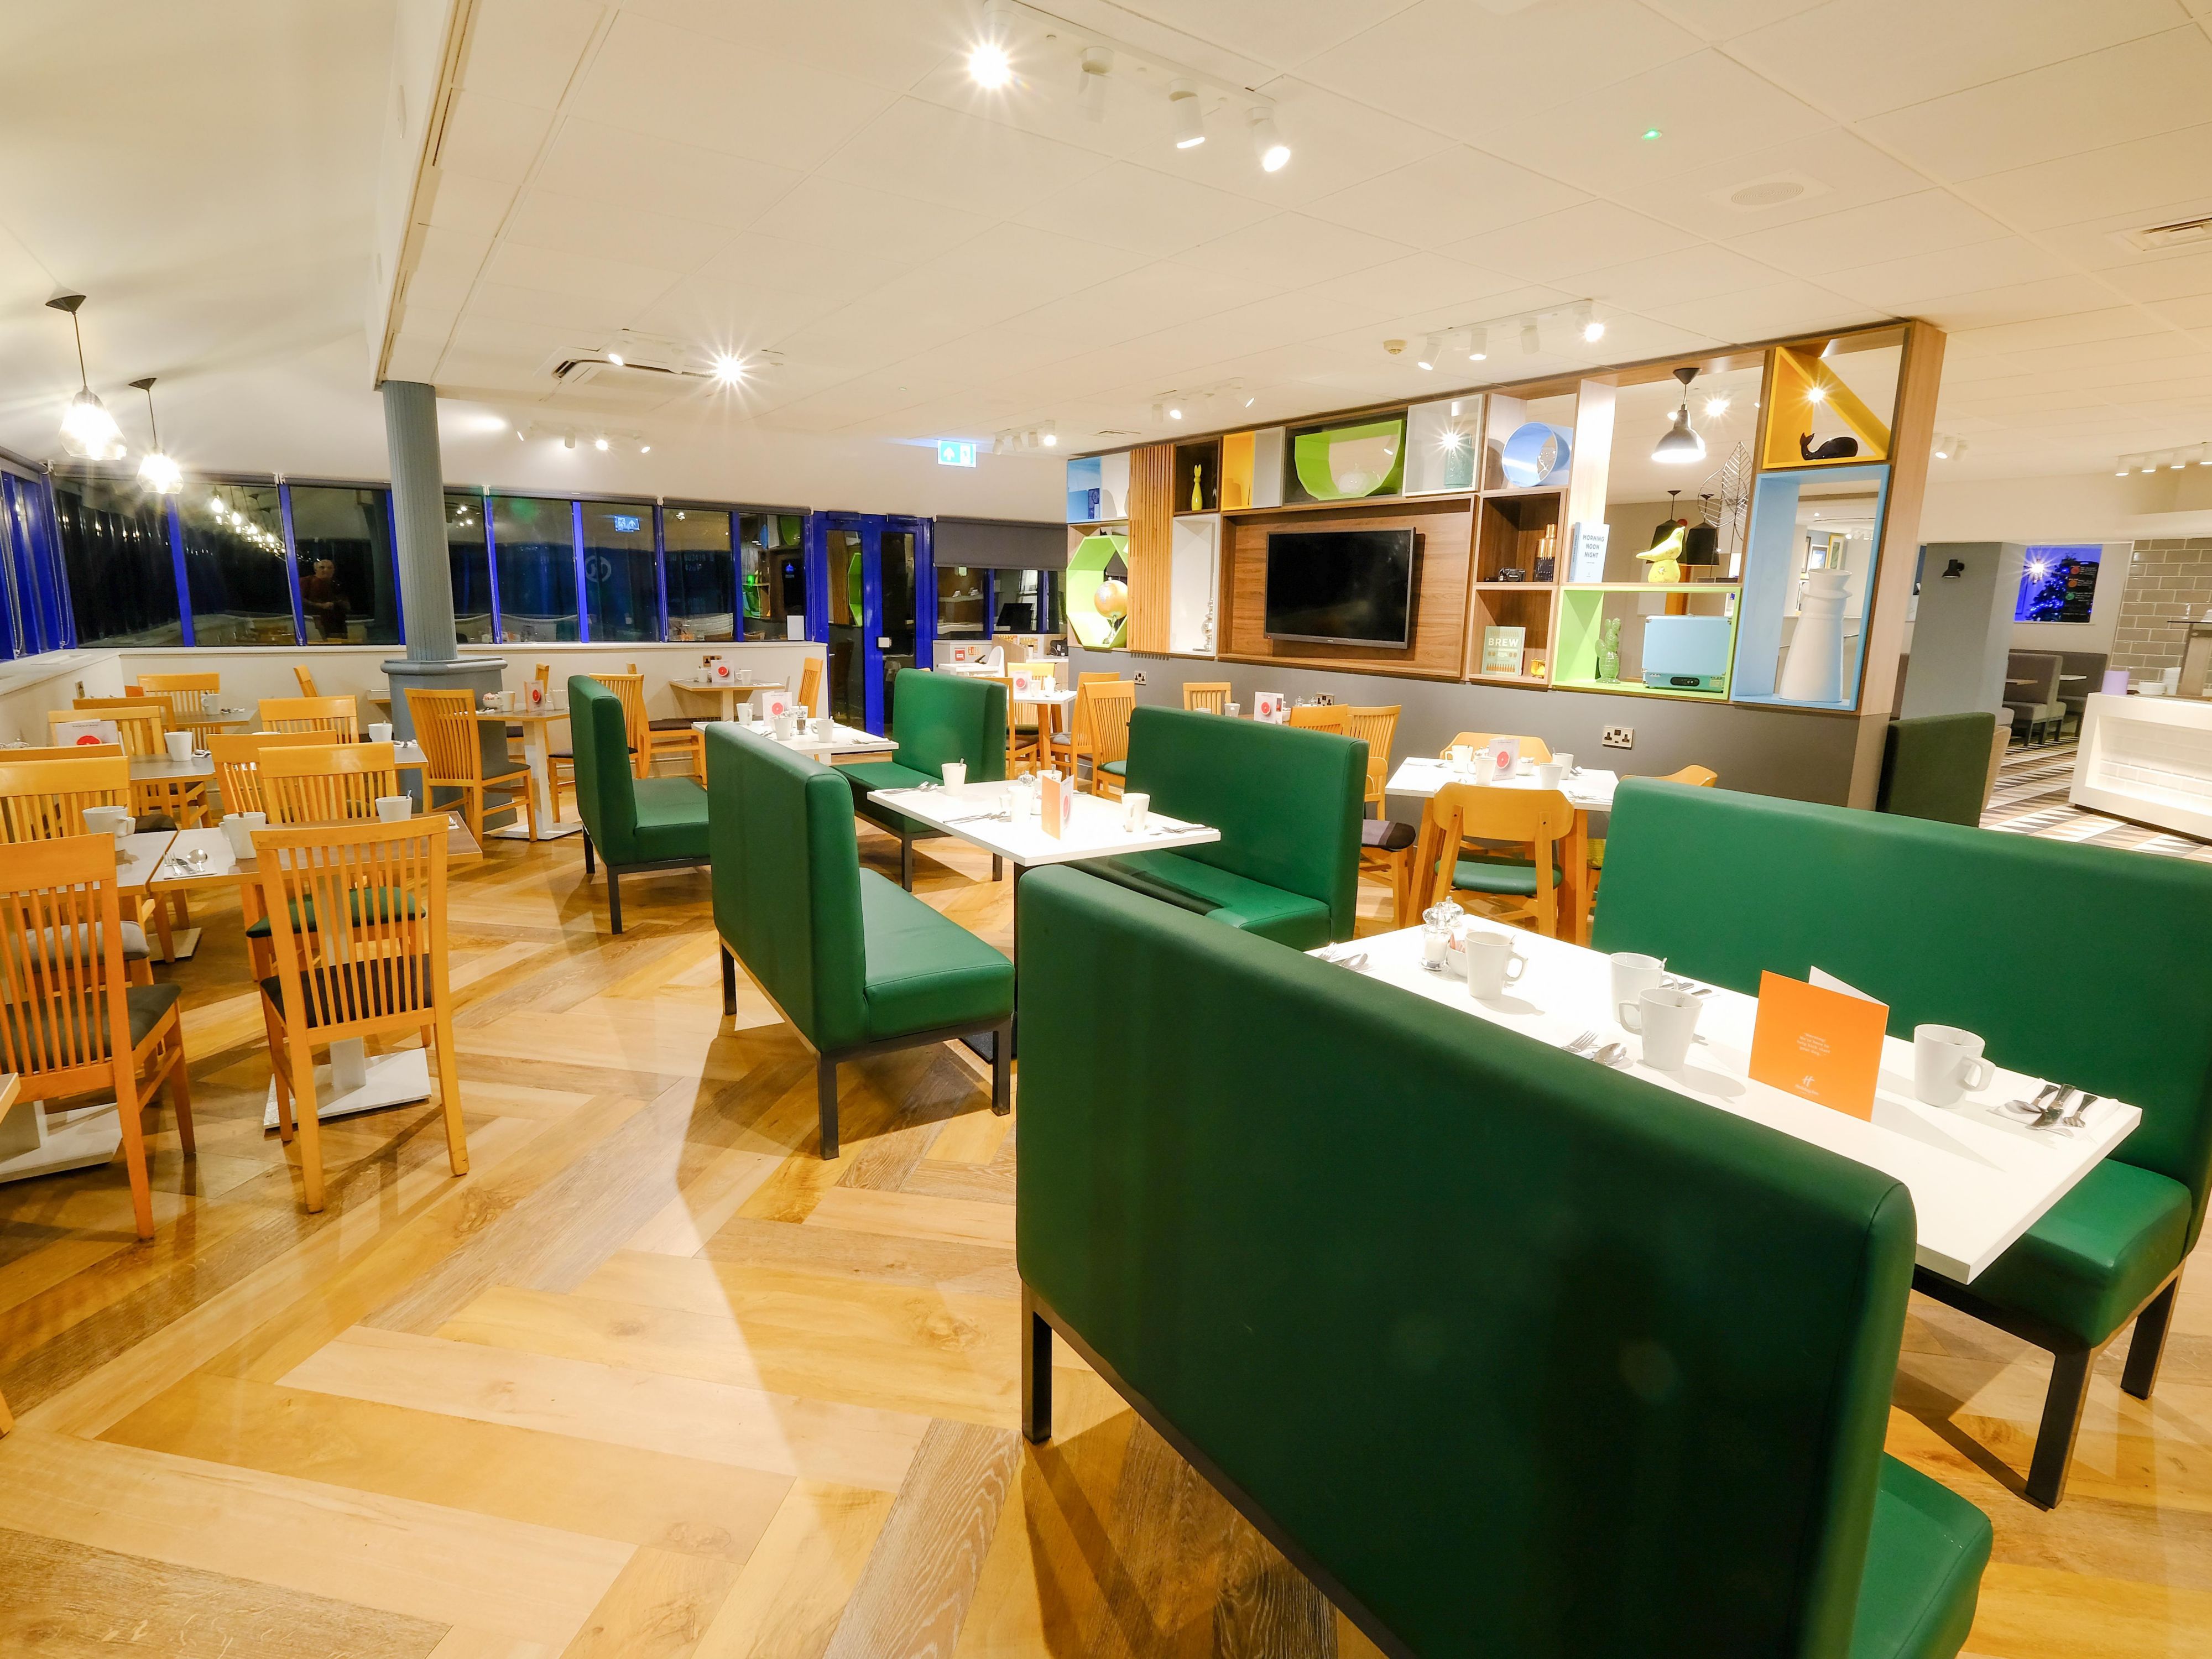 Our Conservatory Restaurant is bright and airy and benefits from natural light, providing a lovely ambience for you to enjoy your meal in, whether that's breakfast, lunch or dinner. We also have ample outdoor seating available so you can enjoy a spot of al fresco dining on warmer days. 